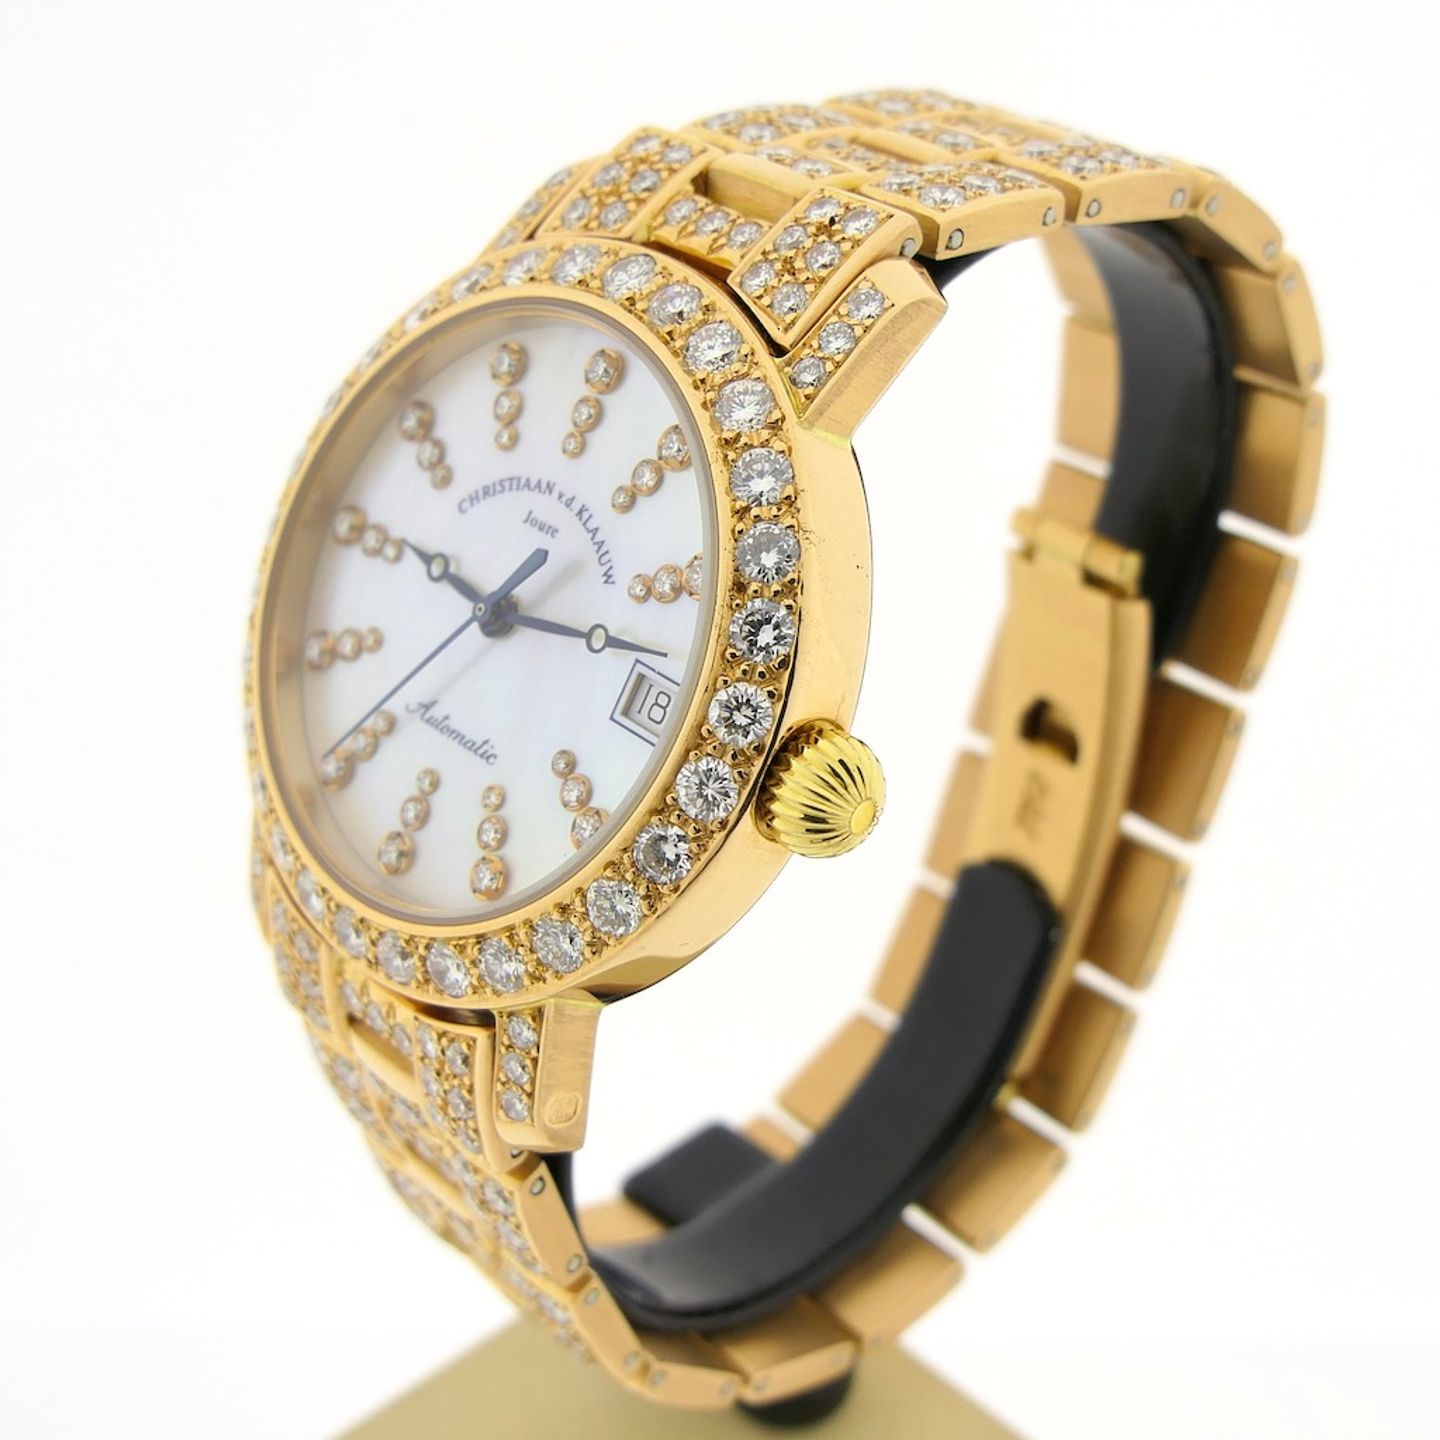 Christiaan vd Klaauw Real Moon Joure Unknown (2005) - Pearl dial 35 mm Yellow Gold case (2/8)